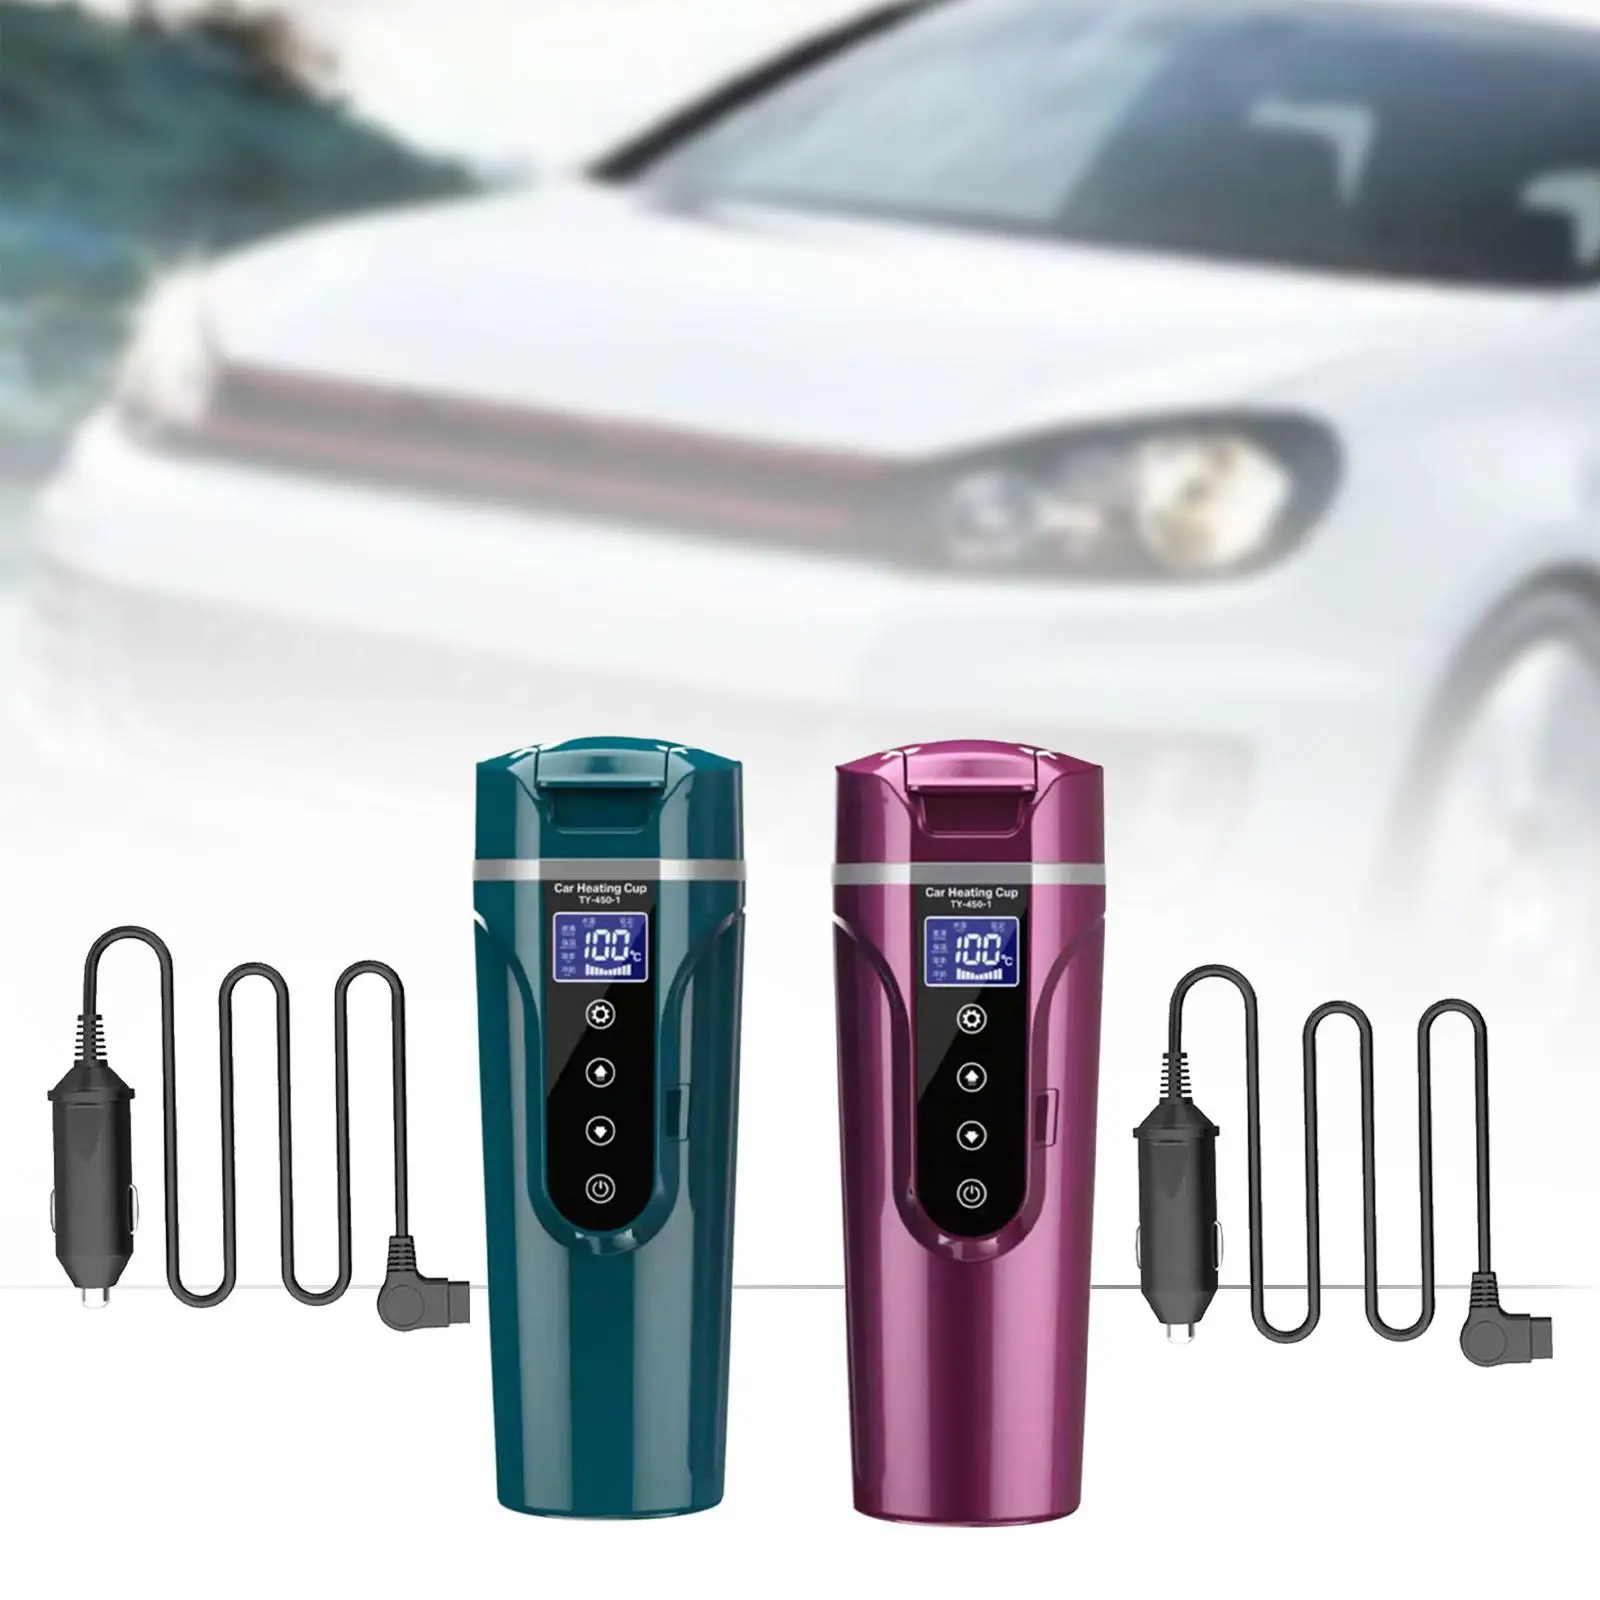 Car Heating Cup Fast Boiling Leakproof 12V/24V Travel Car Truck Kettle Car Travel Kettle for Tea Coffee Milk Water Travel